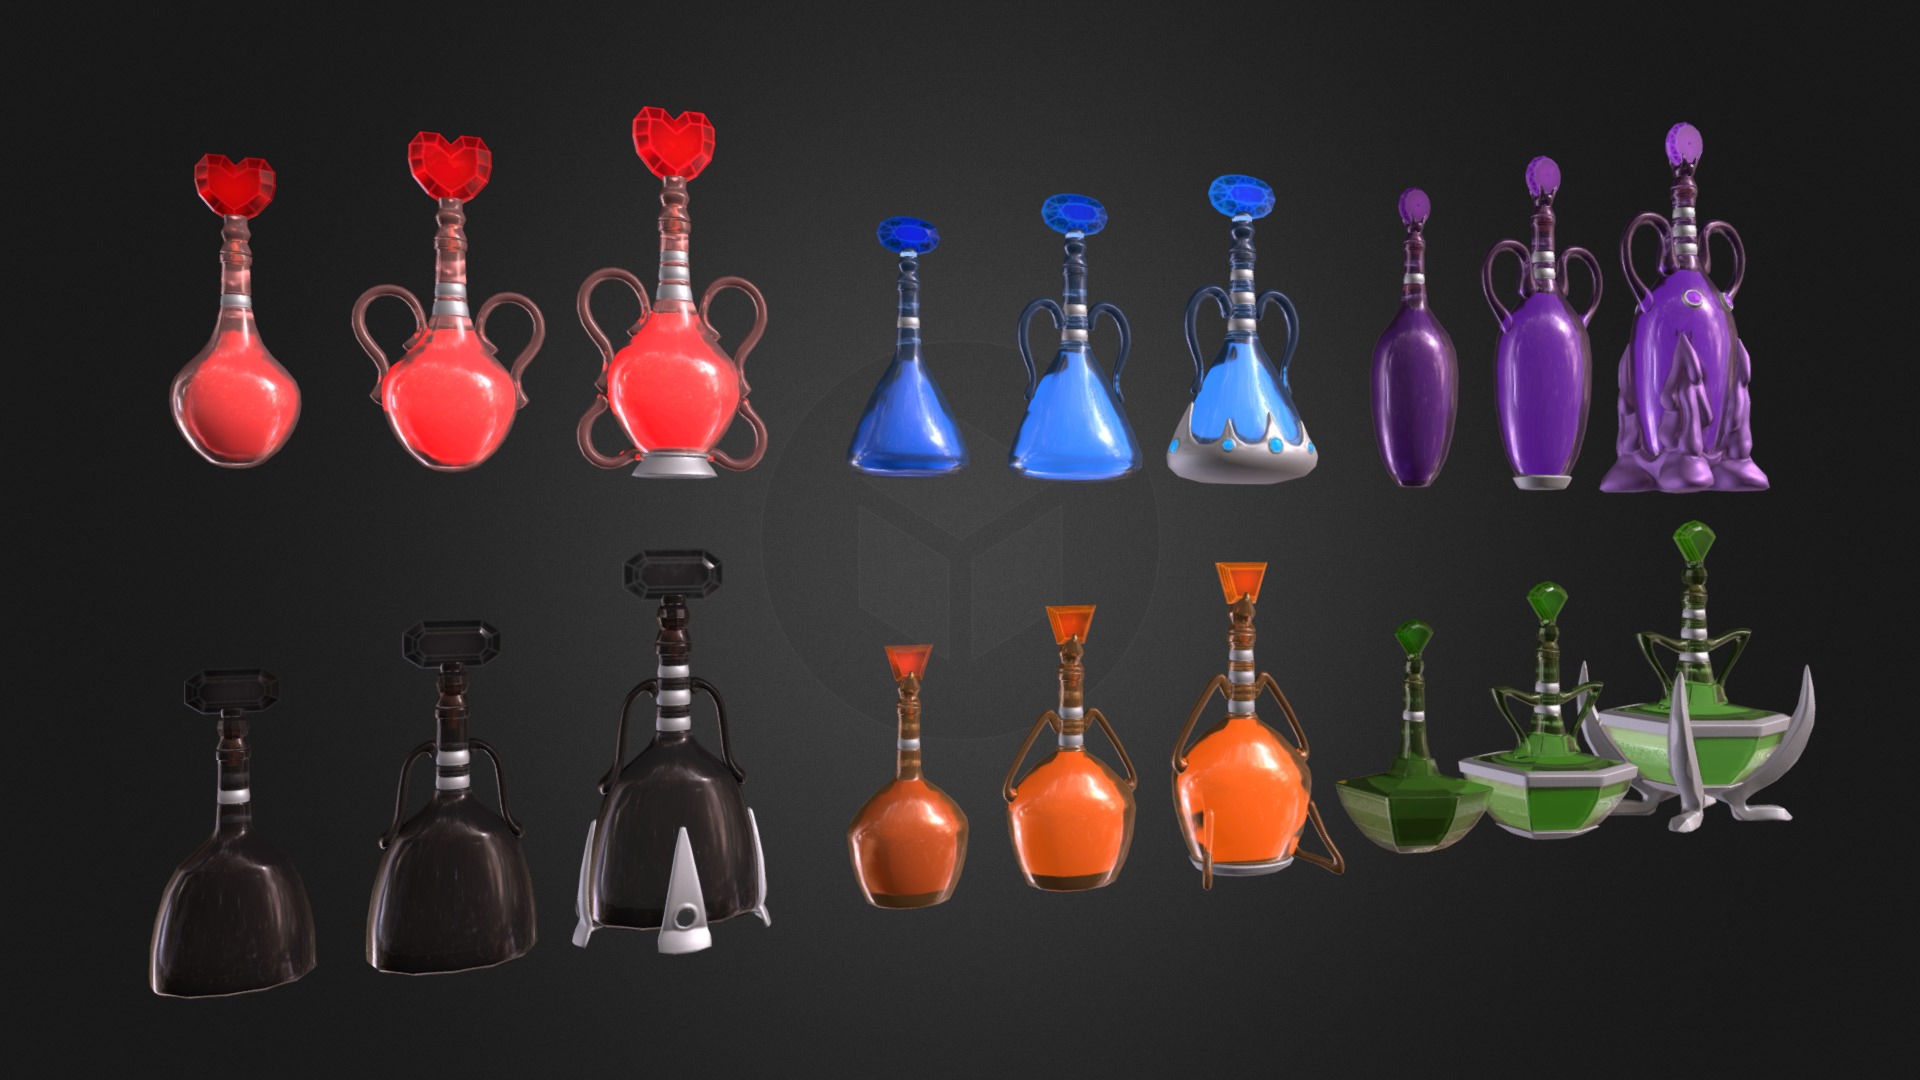 3D model Six Fantasy Potion Sets. - This is a 3D model of the Six Fantasy Potion Sets.. The 3D model is about a group of glass vases.